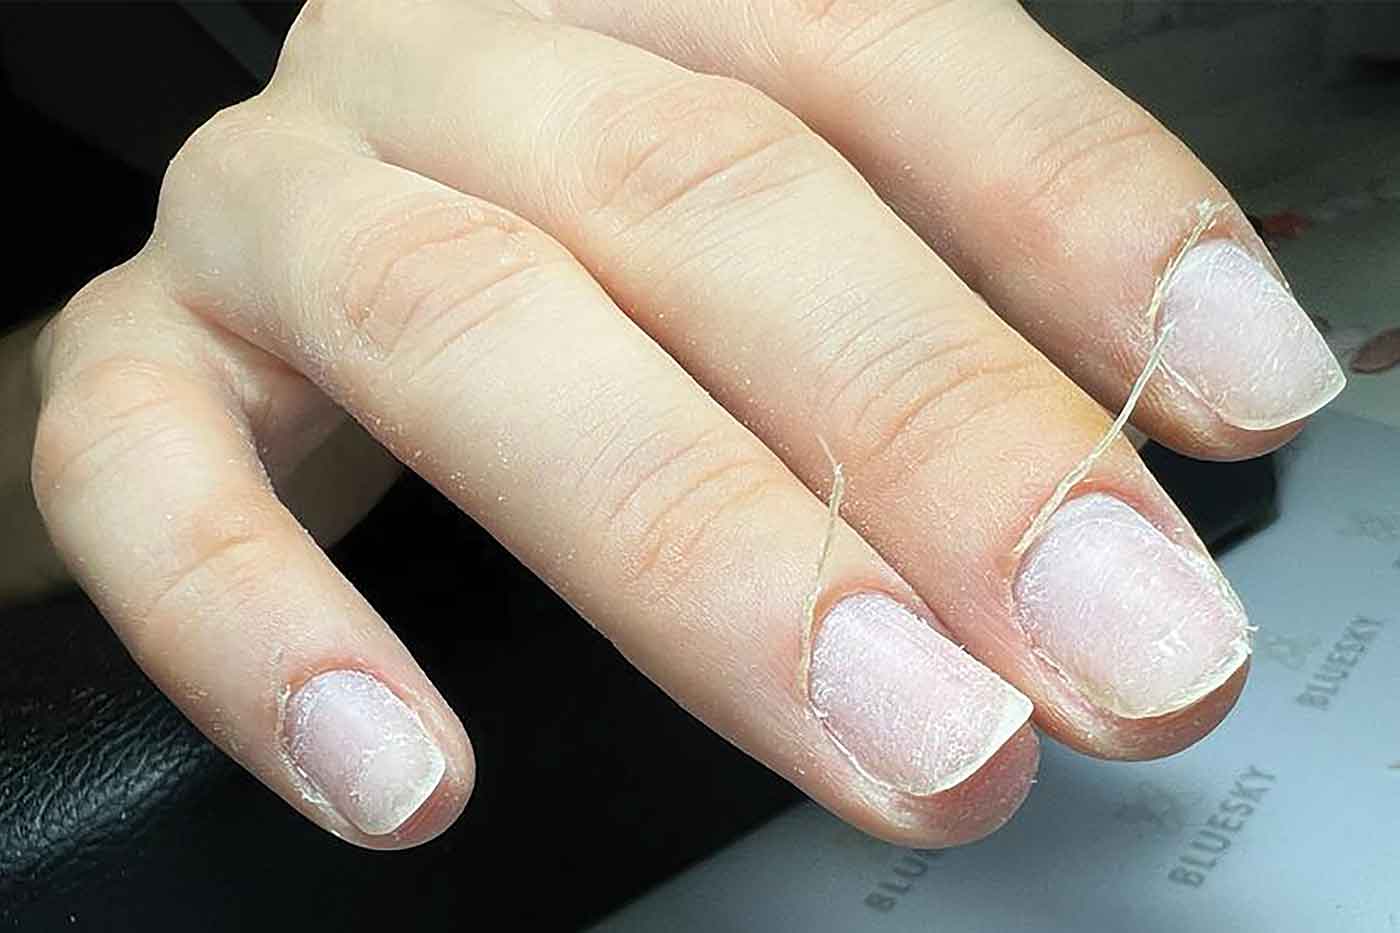 3. Russian manicure techniques for beginners - wide 3